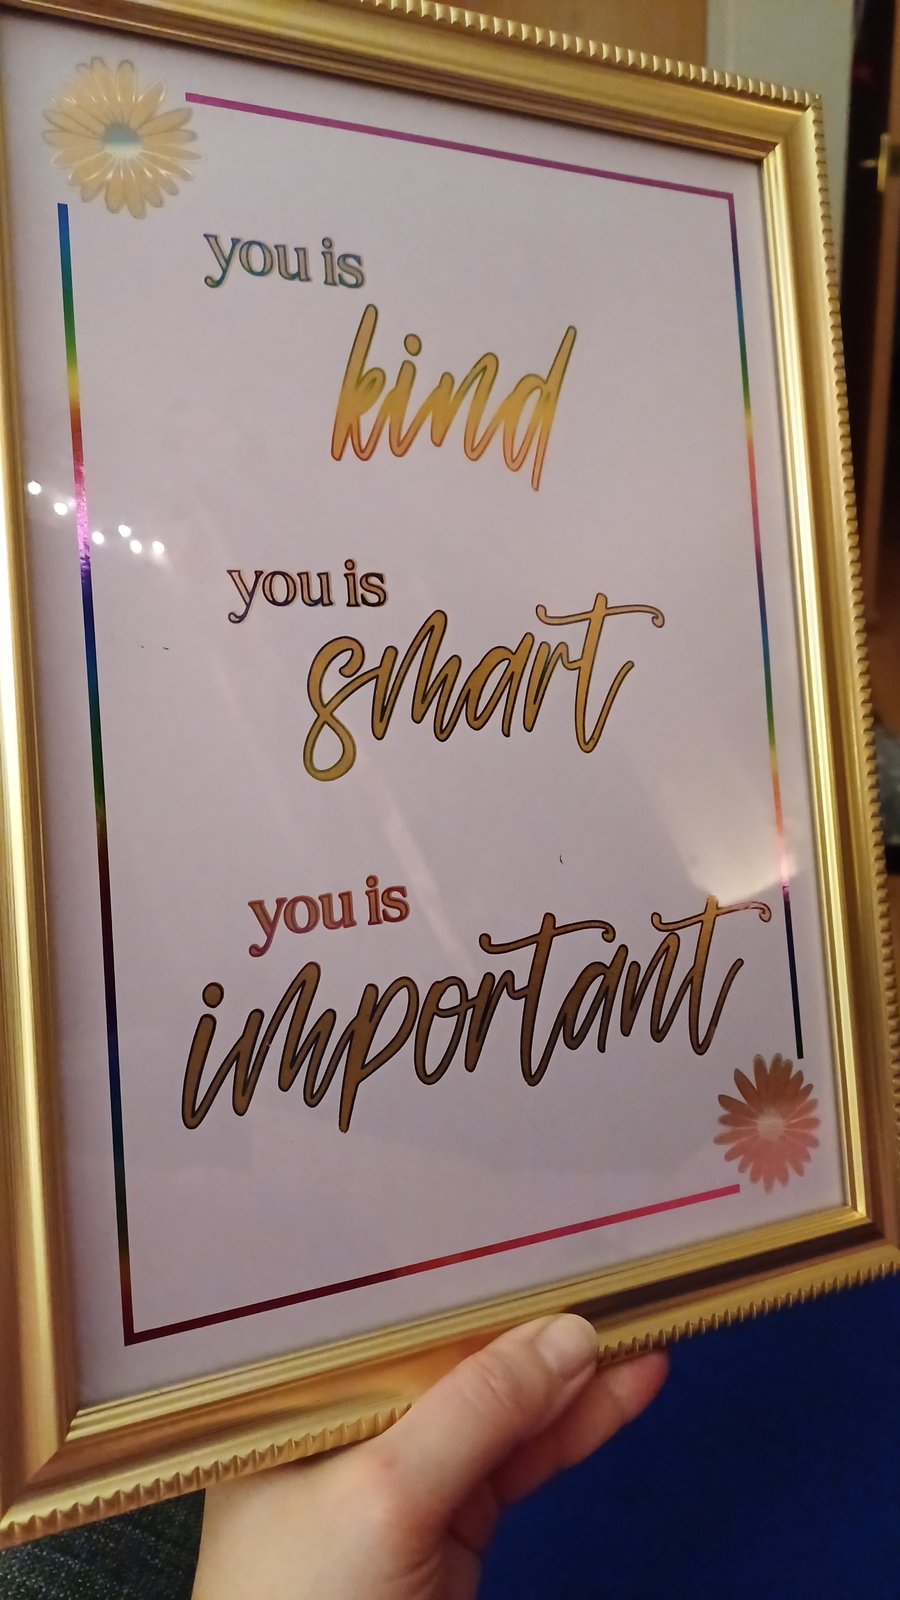 The Help - You is Kind. You is Smart. You is Important.